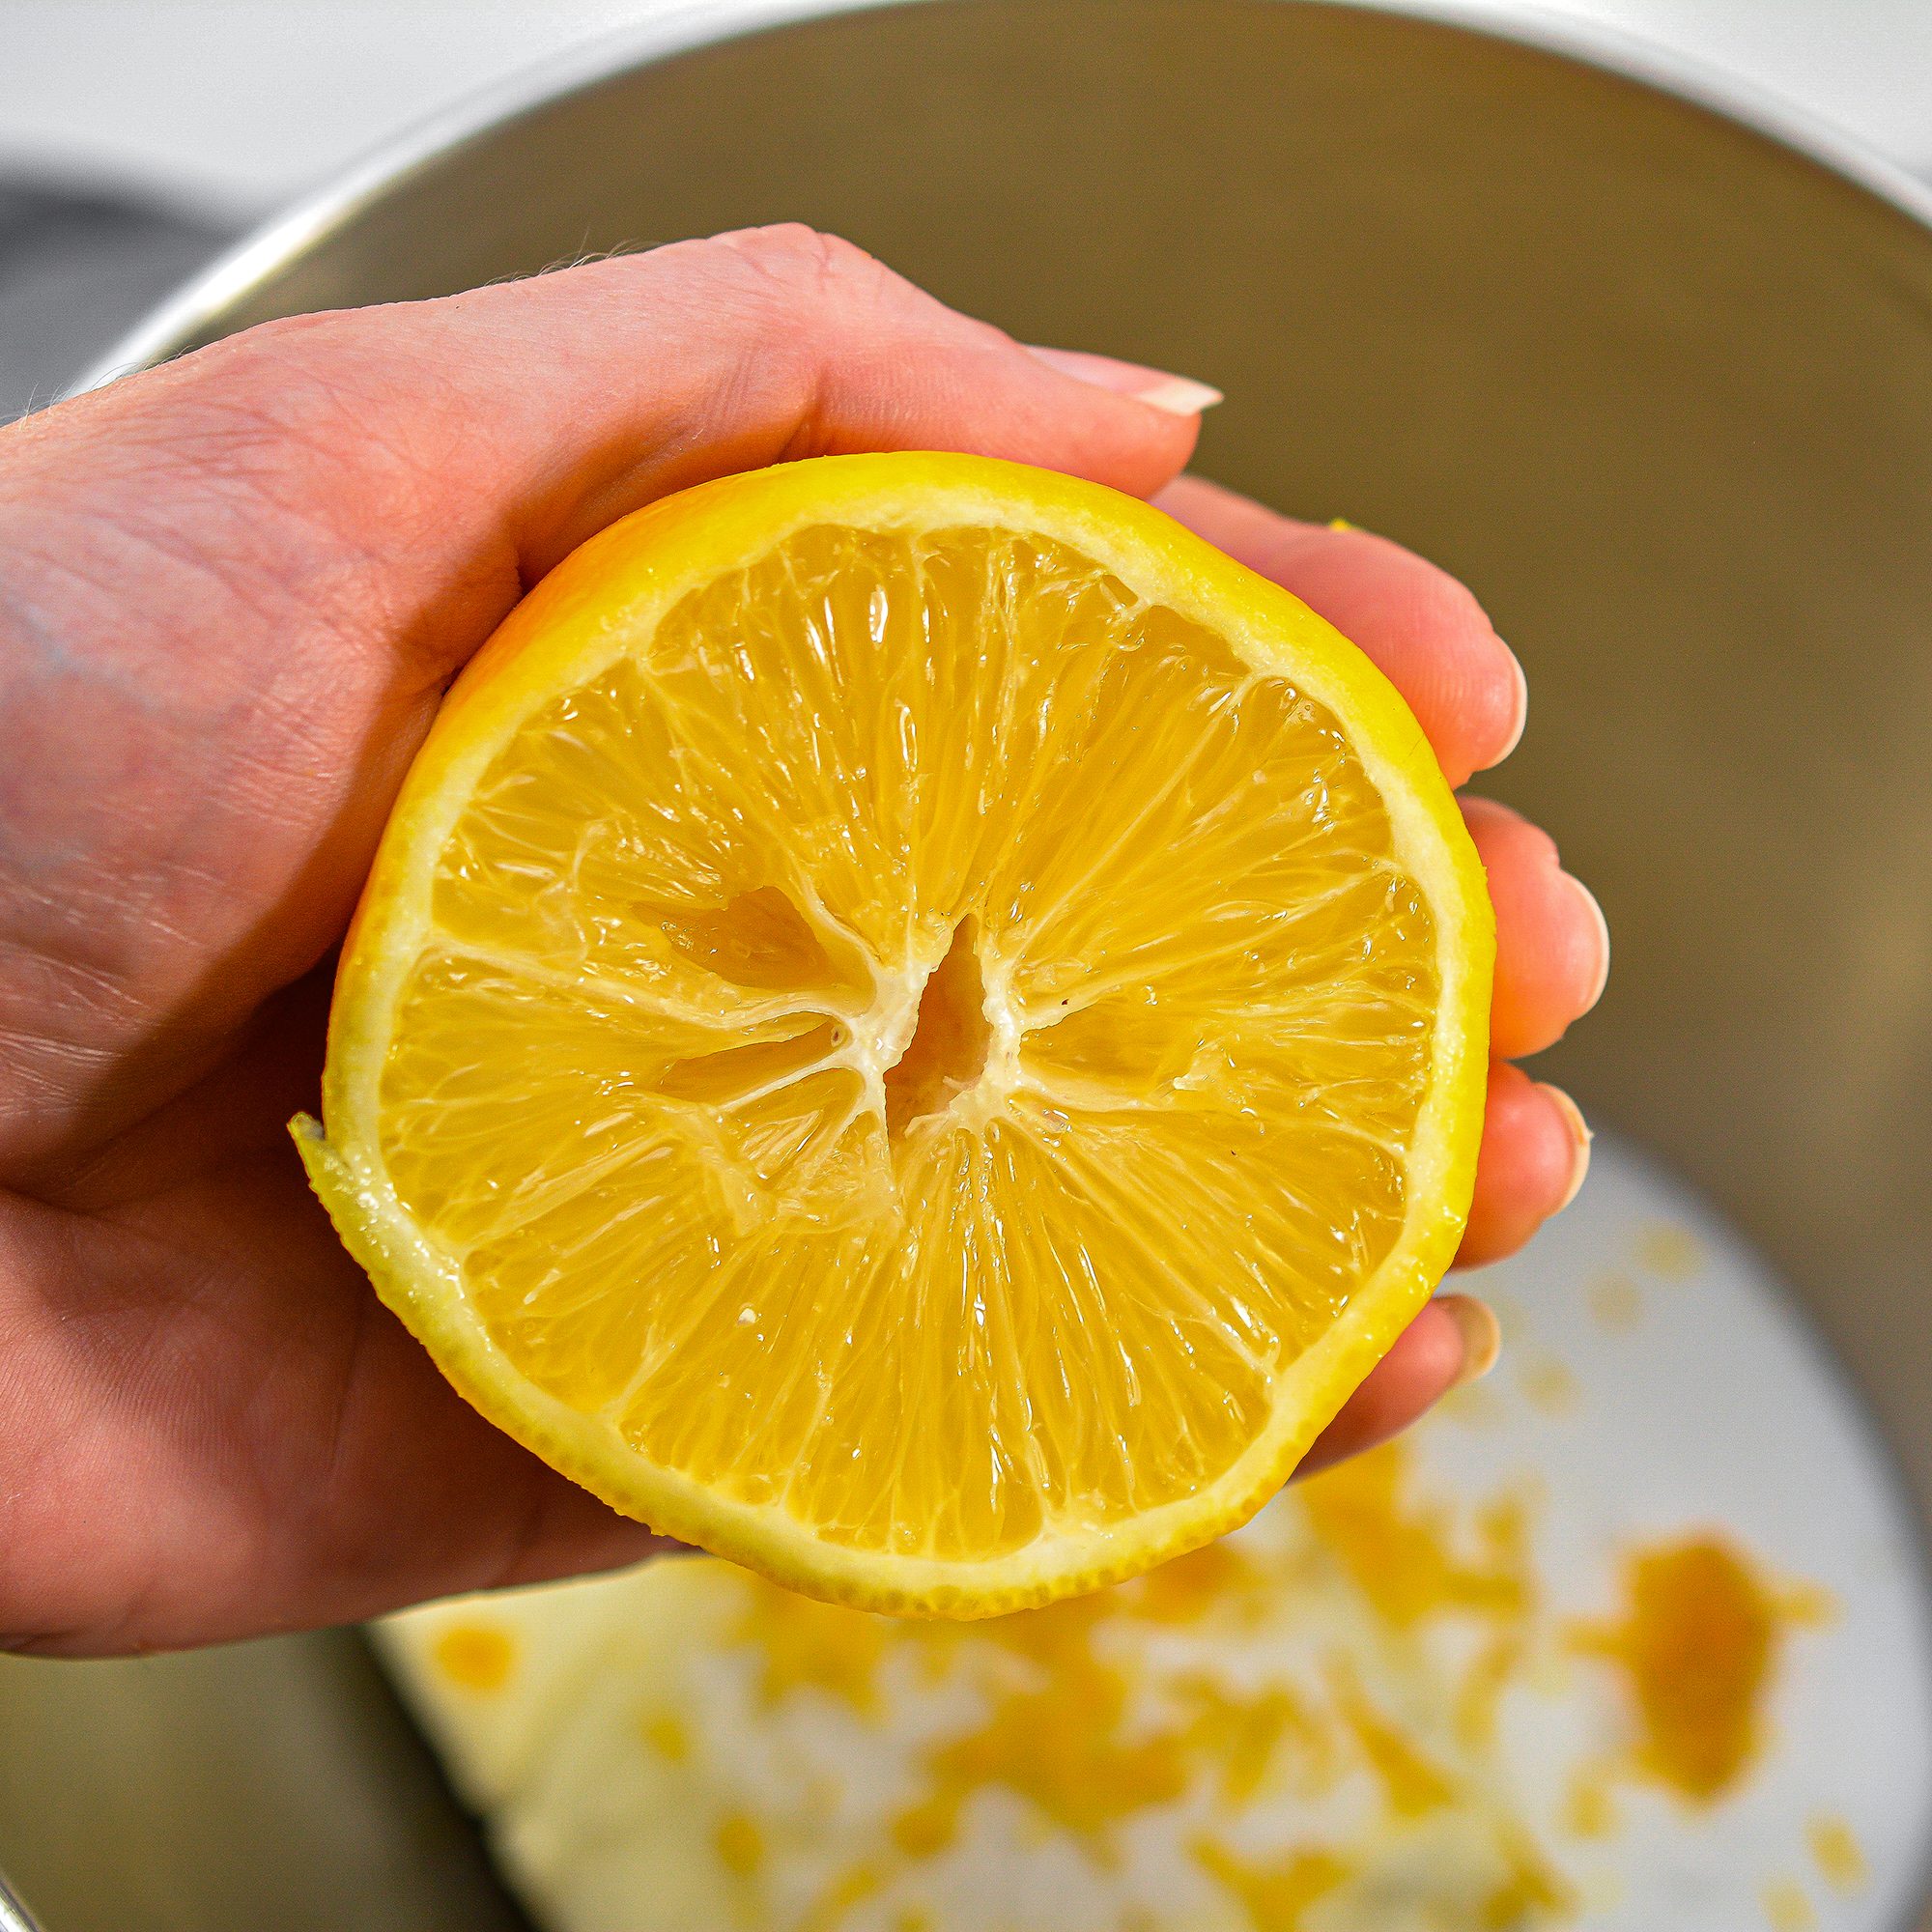 In a mixing bowl, combine the cream cheese, ½ cup of sugar, lemon juice, and zest and vanilla extract. Beat until smooth.